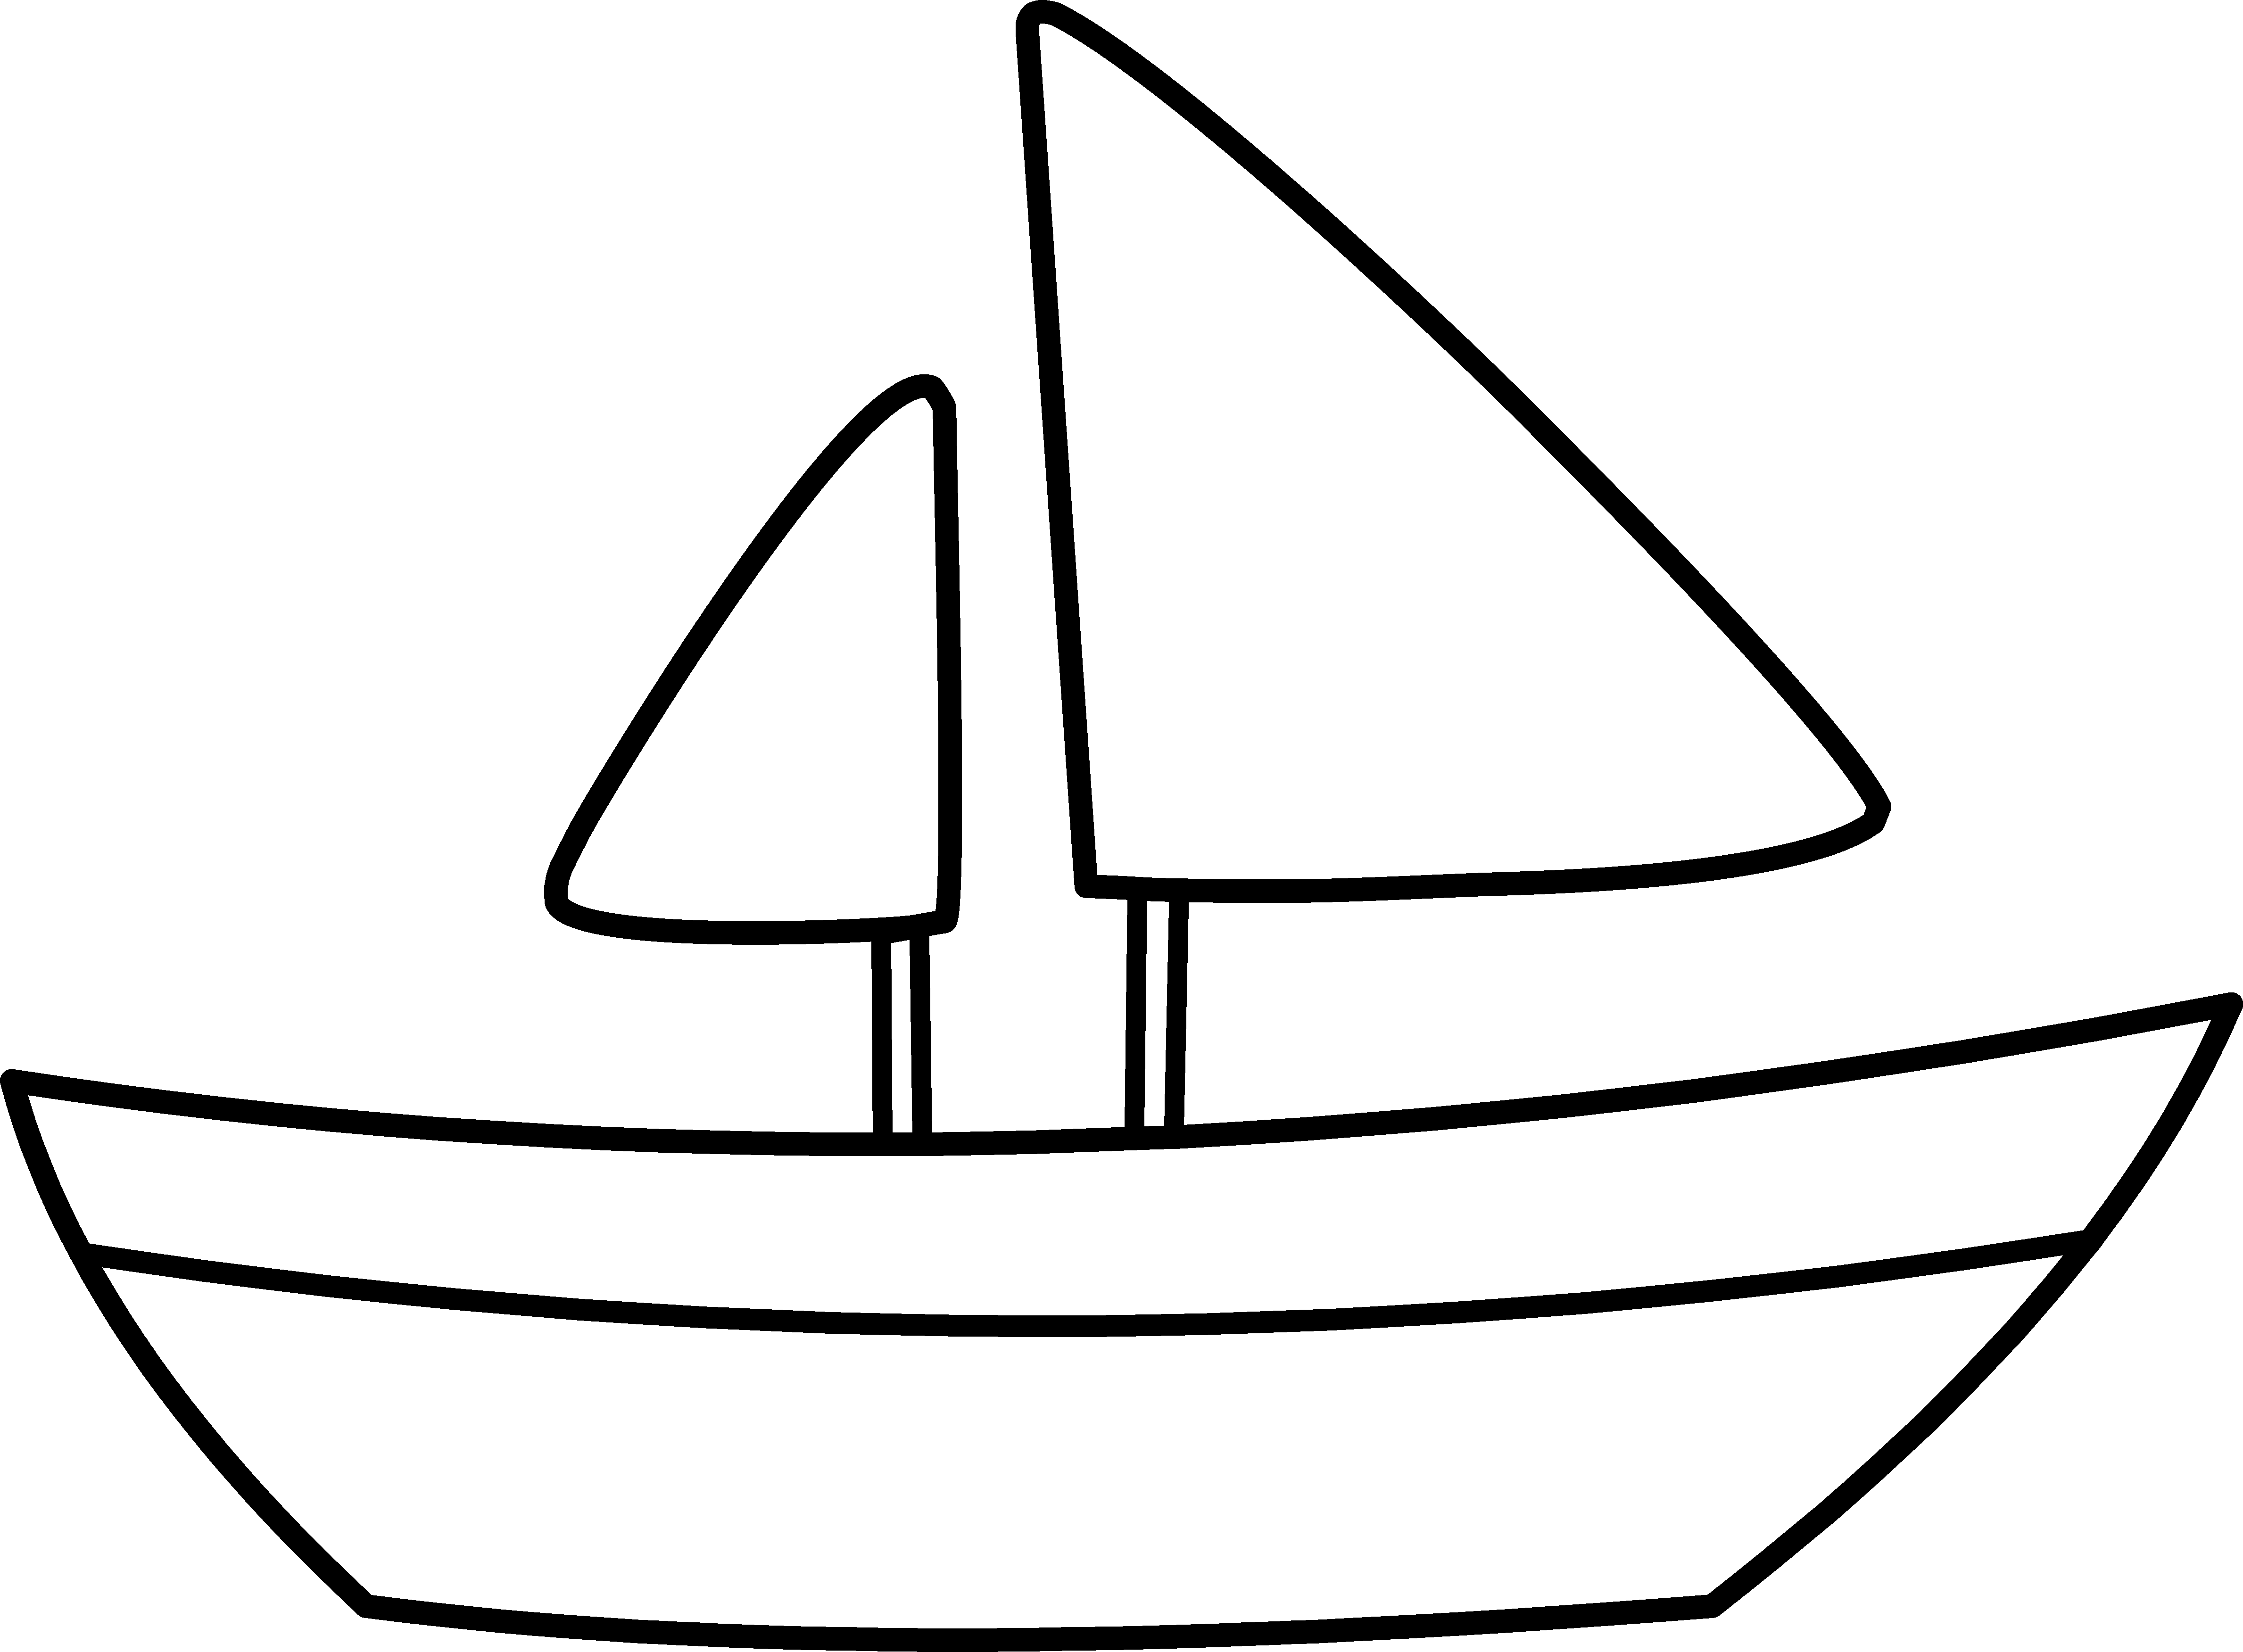 boat-clipart-black-and-white-cliparts-co